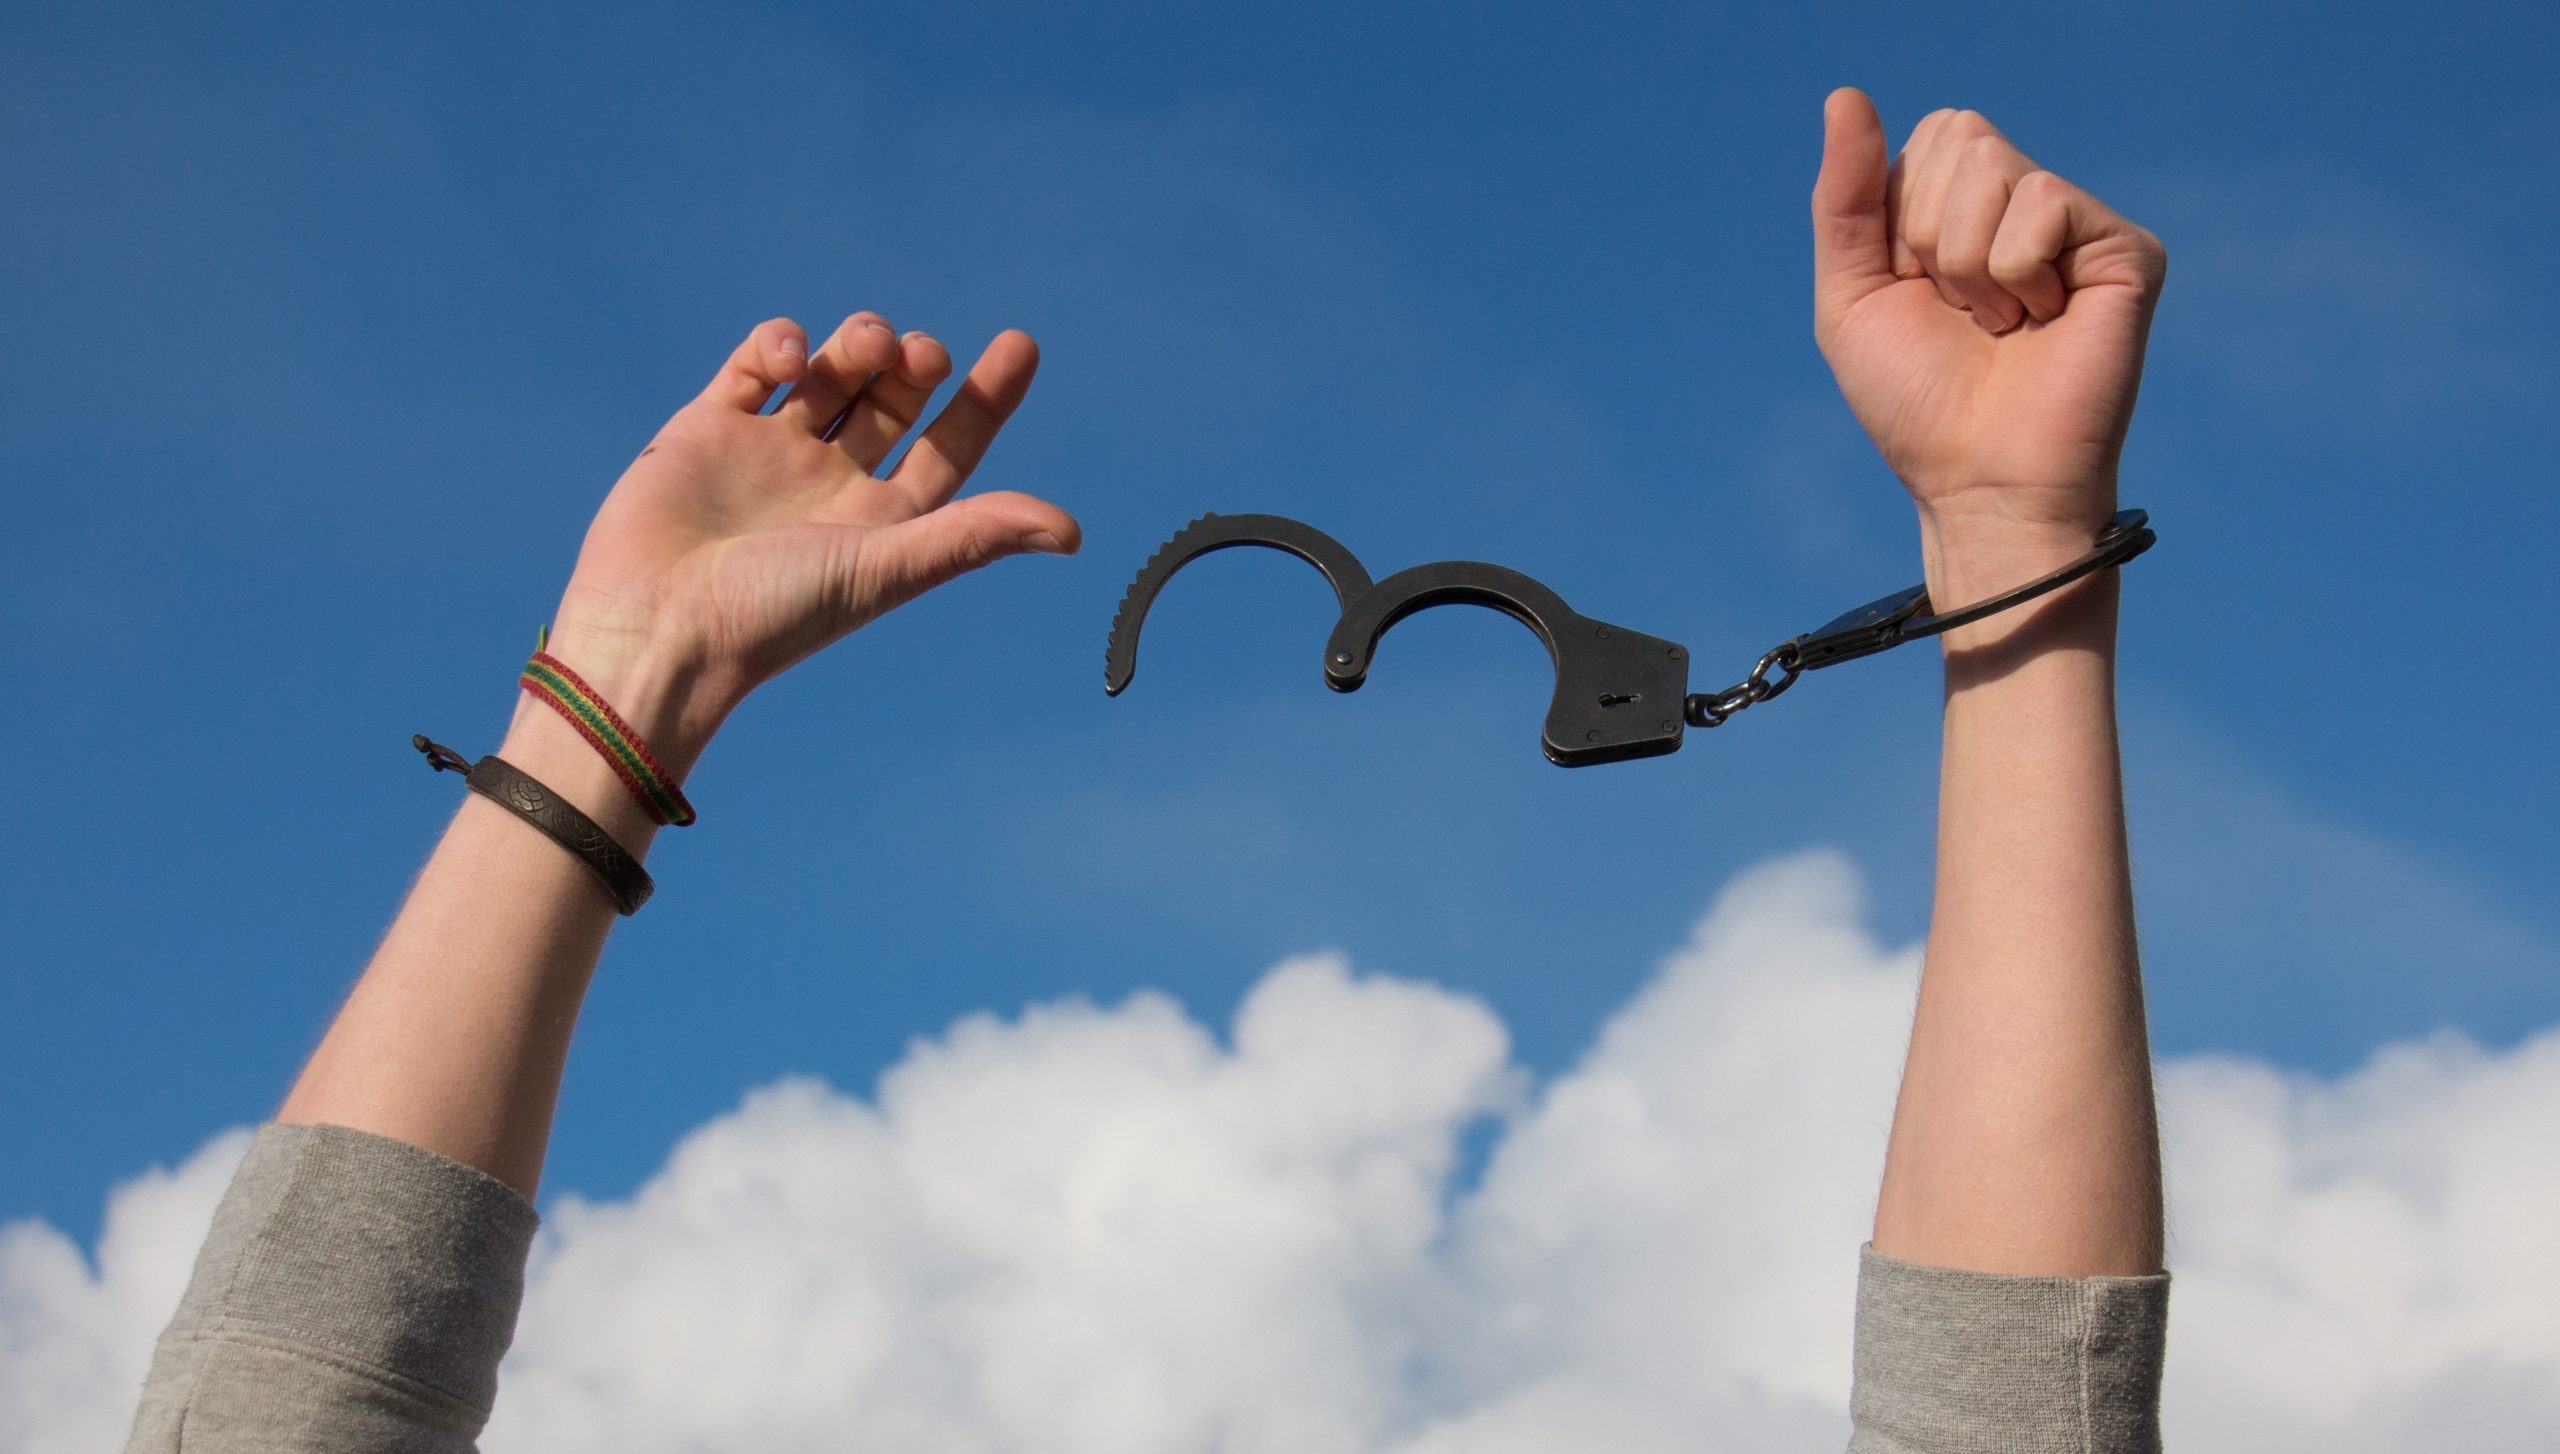 arms breaking free from handcuffs